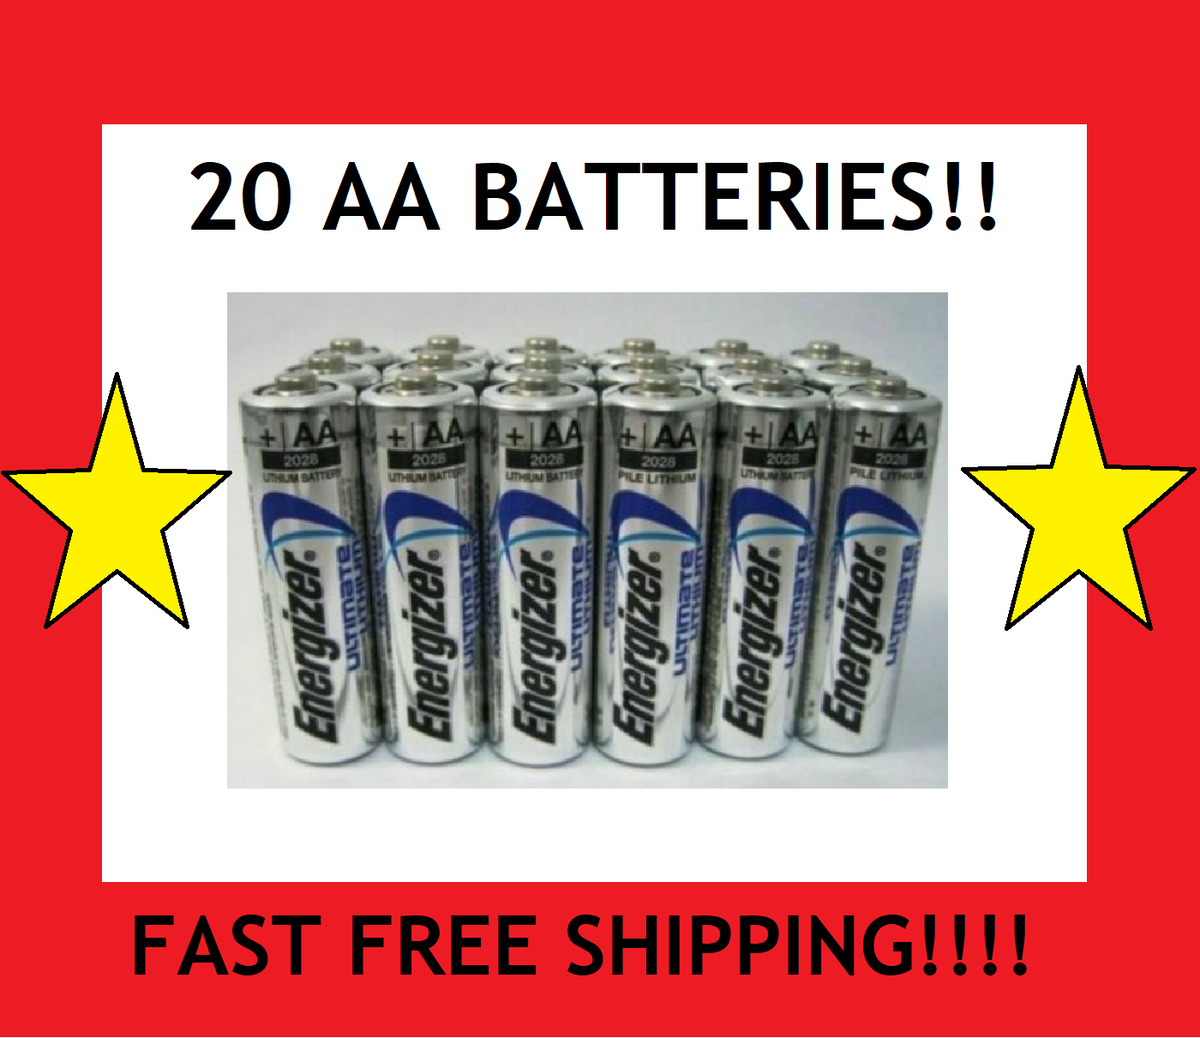 20 Energizer AA Ultimate Lithium Batteries Battery Double A =EXP 2038/2039  NEW 999993917344